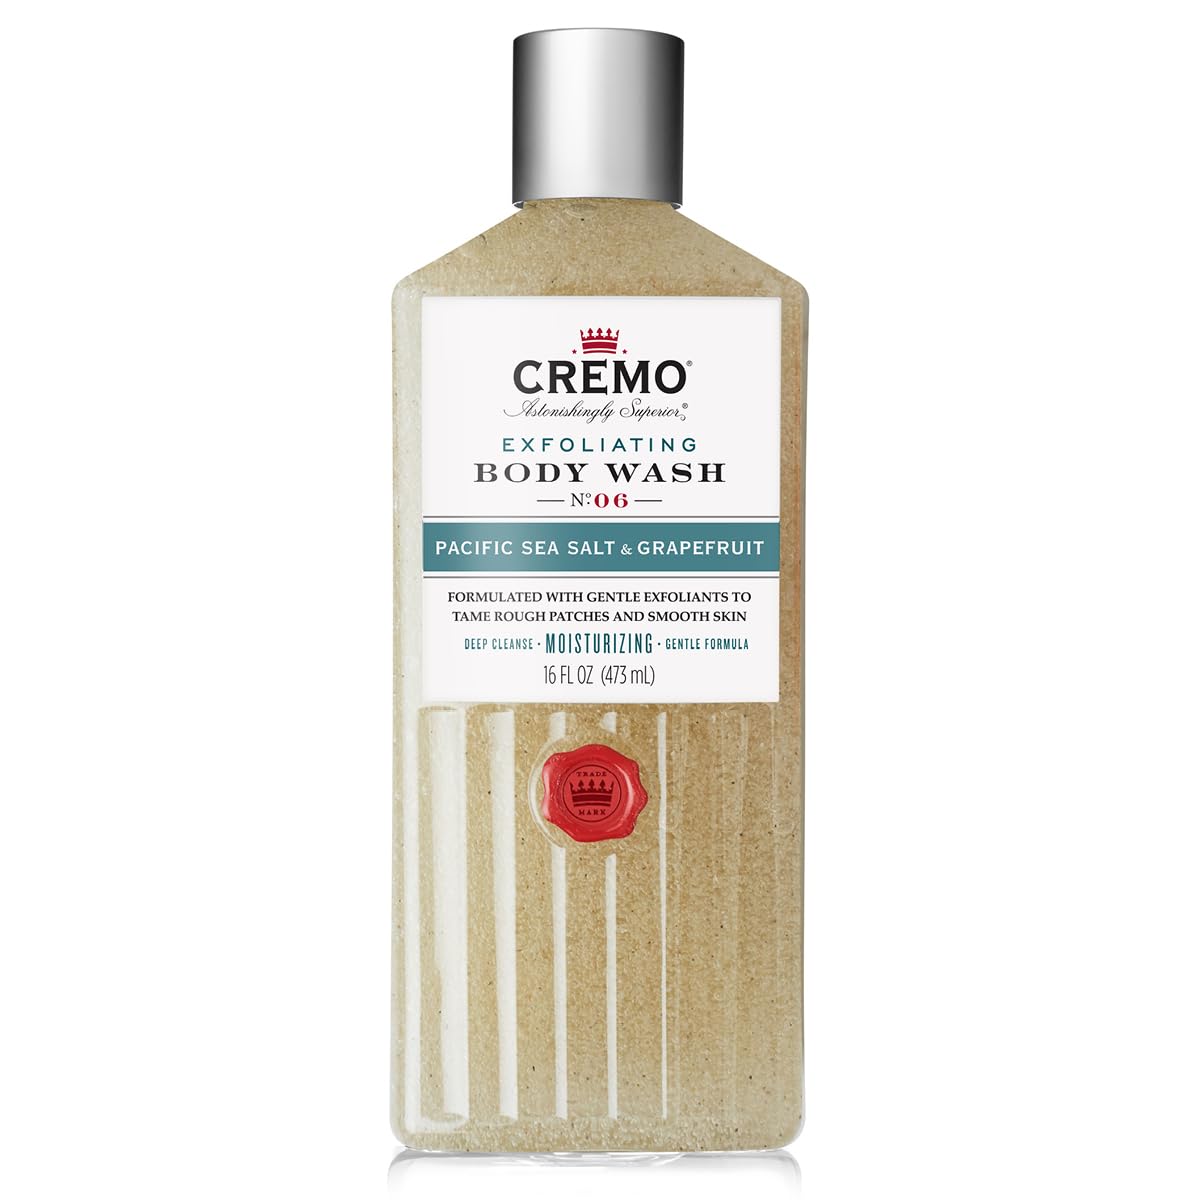 Cremo Rich-Lathering Exfoliating Pacific Sea Salt & Grapefruit Body Wash for Men, A Refreshing Scent with Notes of Fresh Mint, Citron, Cedar and Moss, 16 Fl Oz